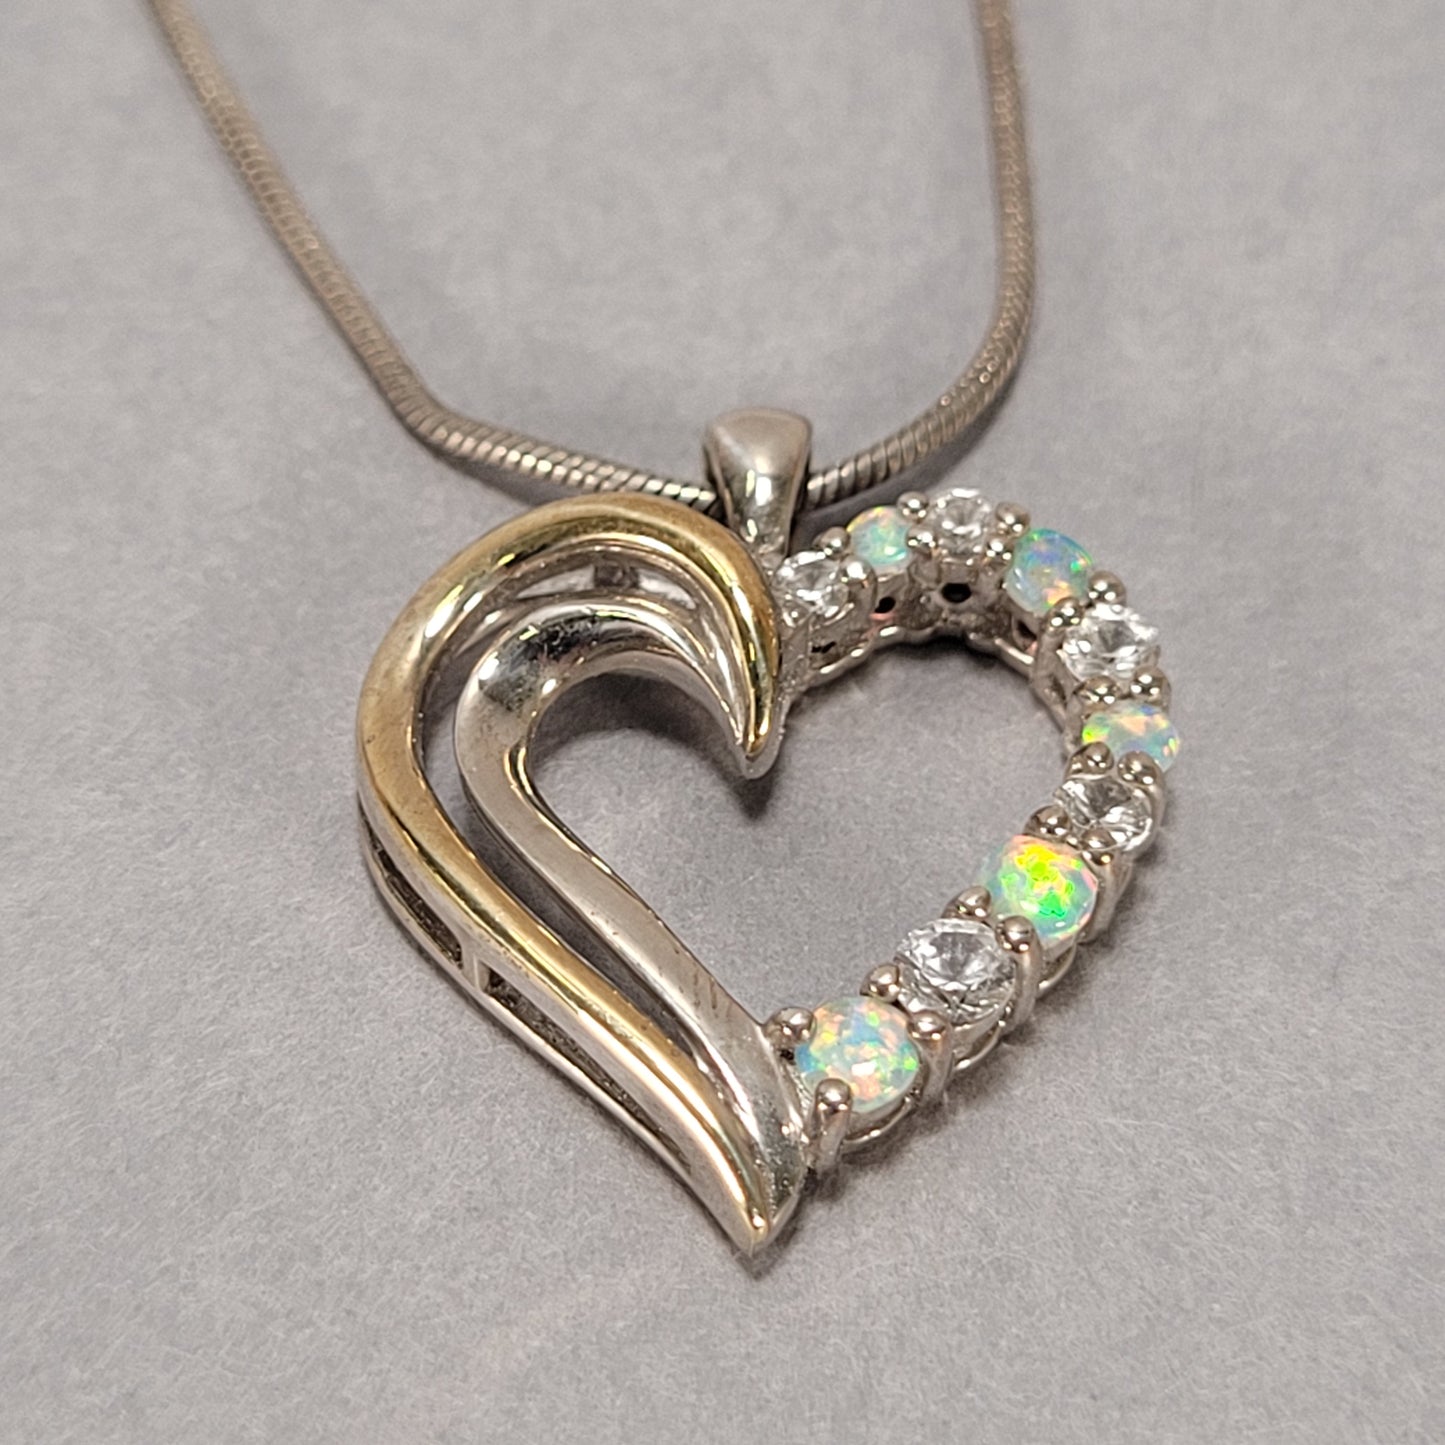 16" Sterling Silver Necklace and Heart Charm with Opal and Clear Stones 6.8g